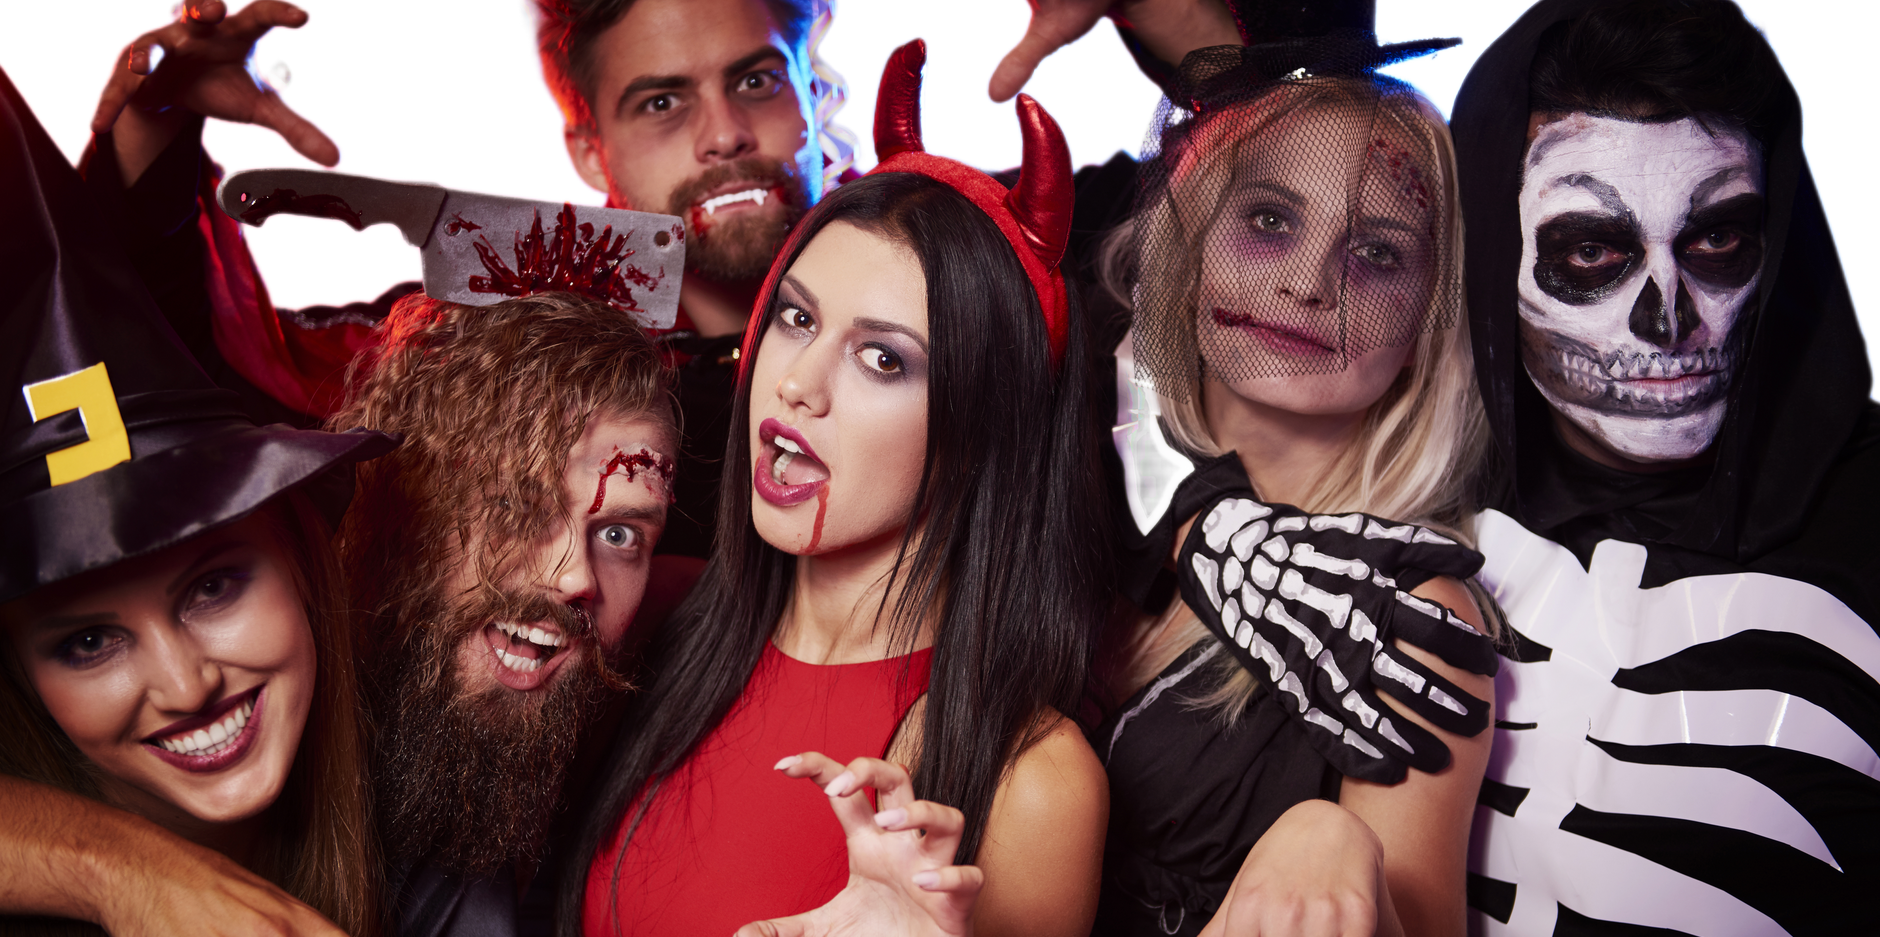 Adult Halloween party. Photographer: gpointstudio. Copyrighted. Licensed (dp: 121907054)